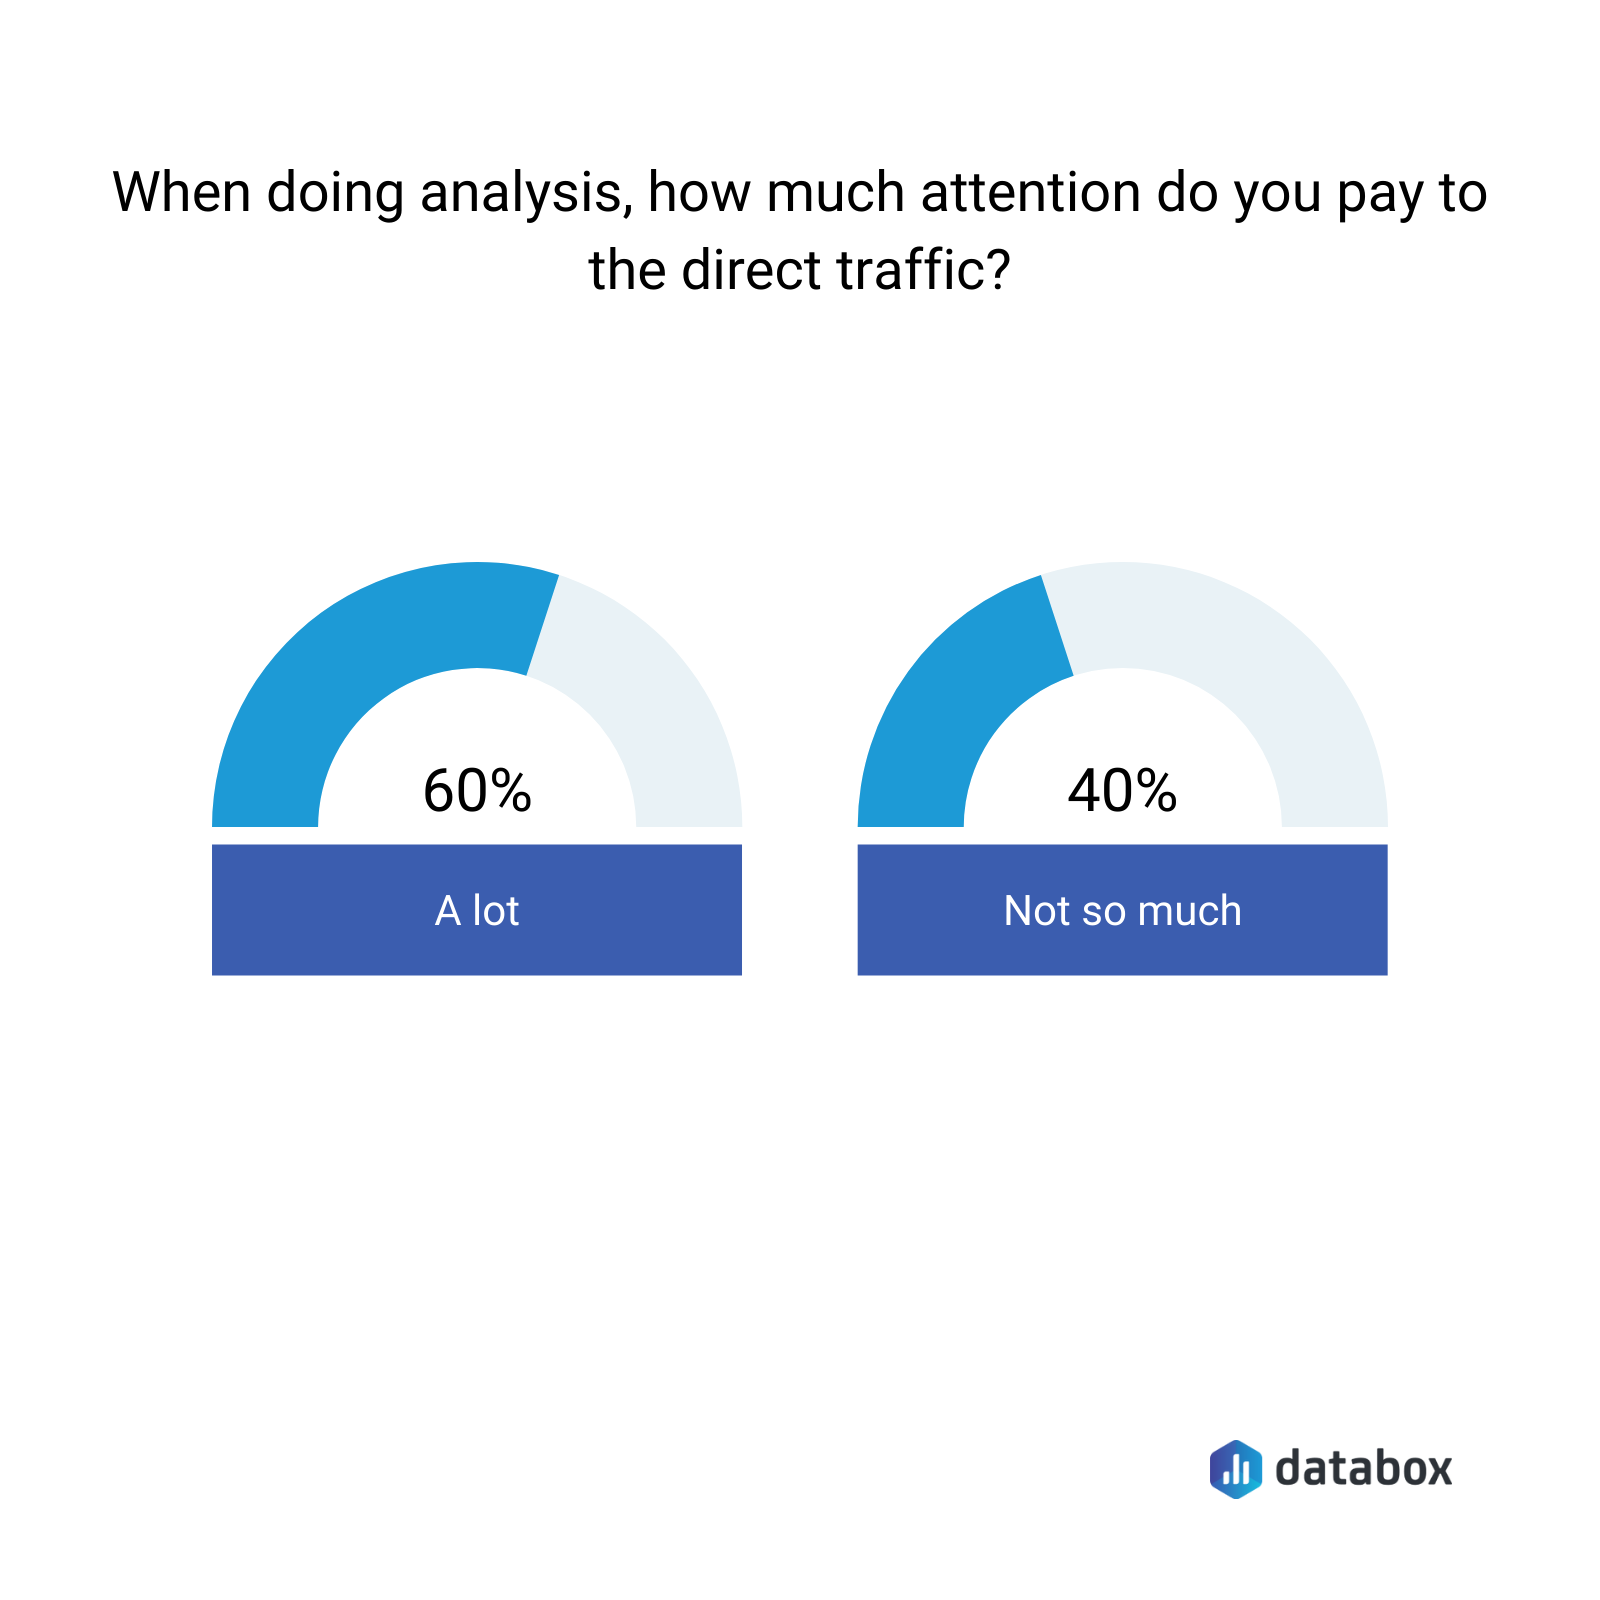 when doing analysis, how much attention do you pay to the direct traffic